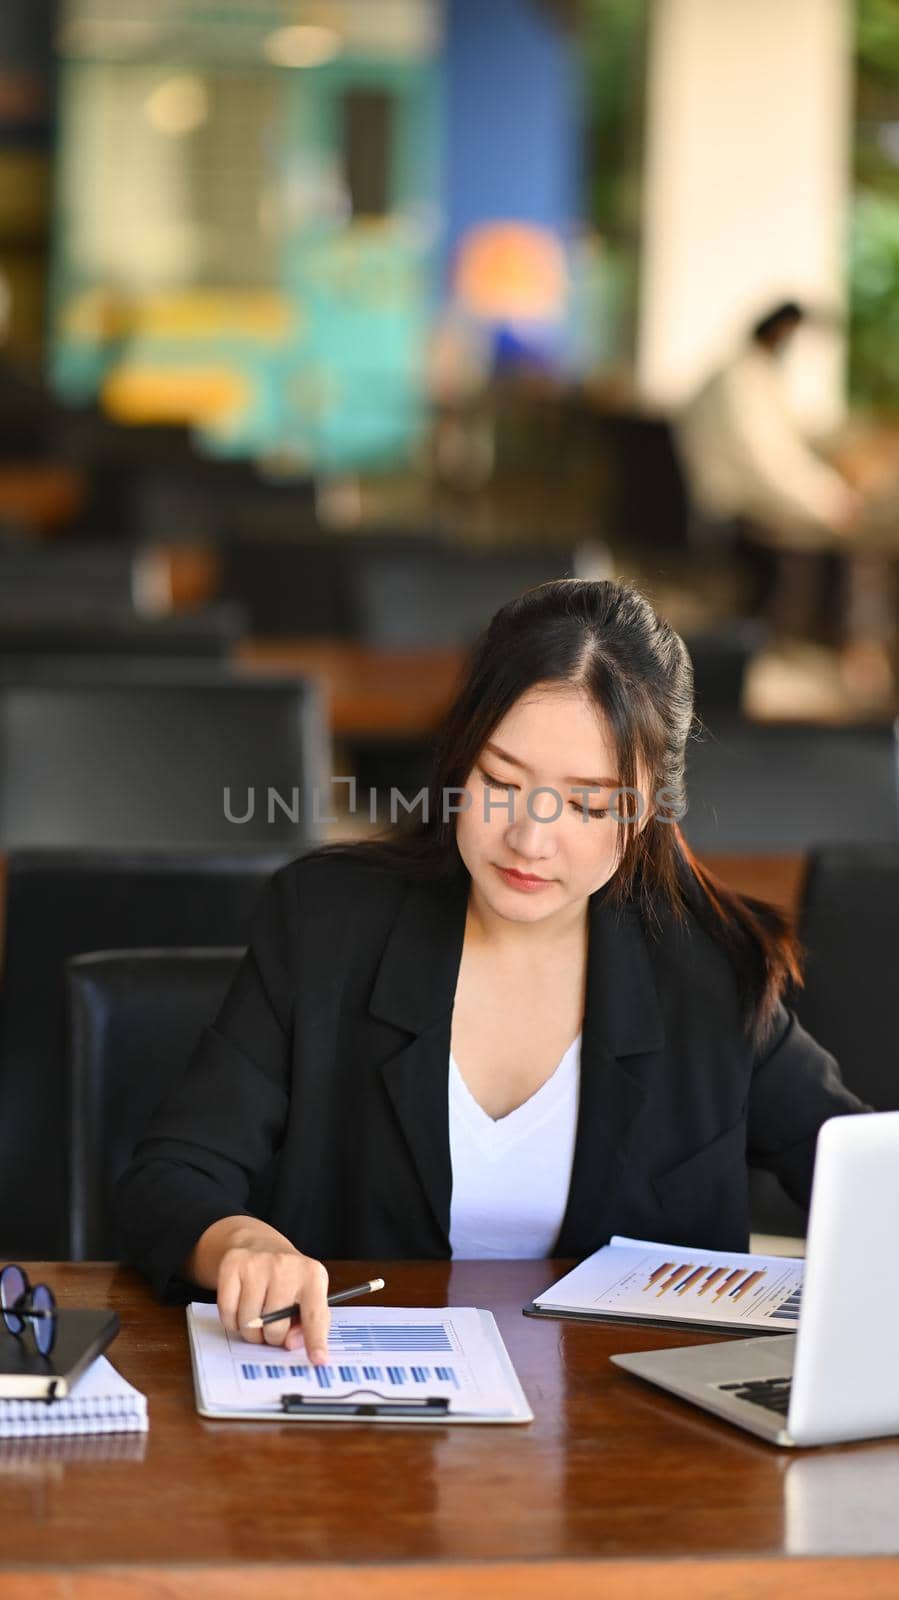 Portrait asian businesswoman analyzing graph and working with laptop at office desk.